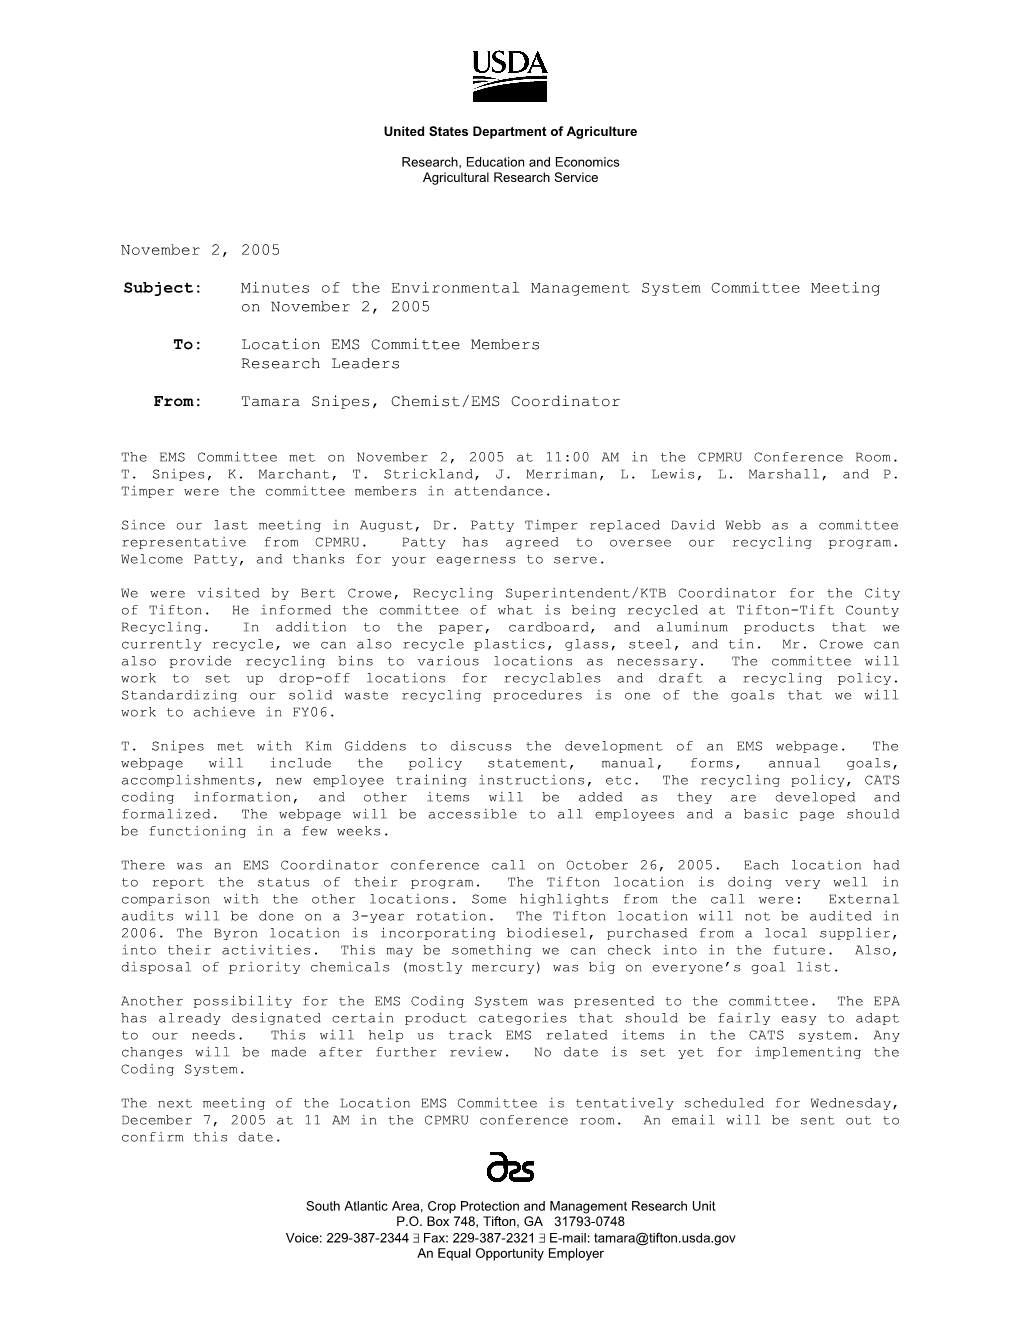 Subject:Minutes of the Environmental Management System Committee Meeting on November 2, 2005